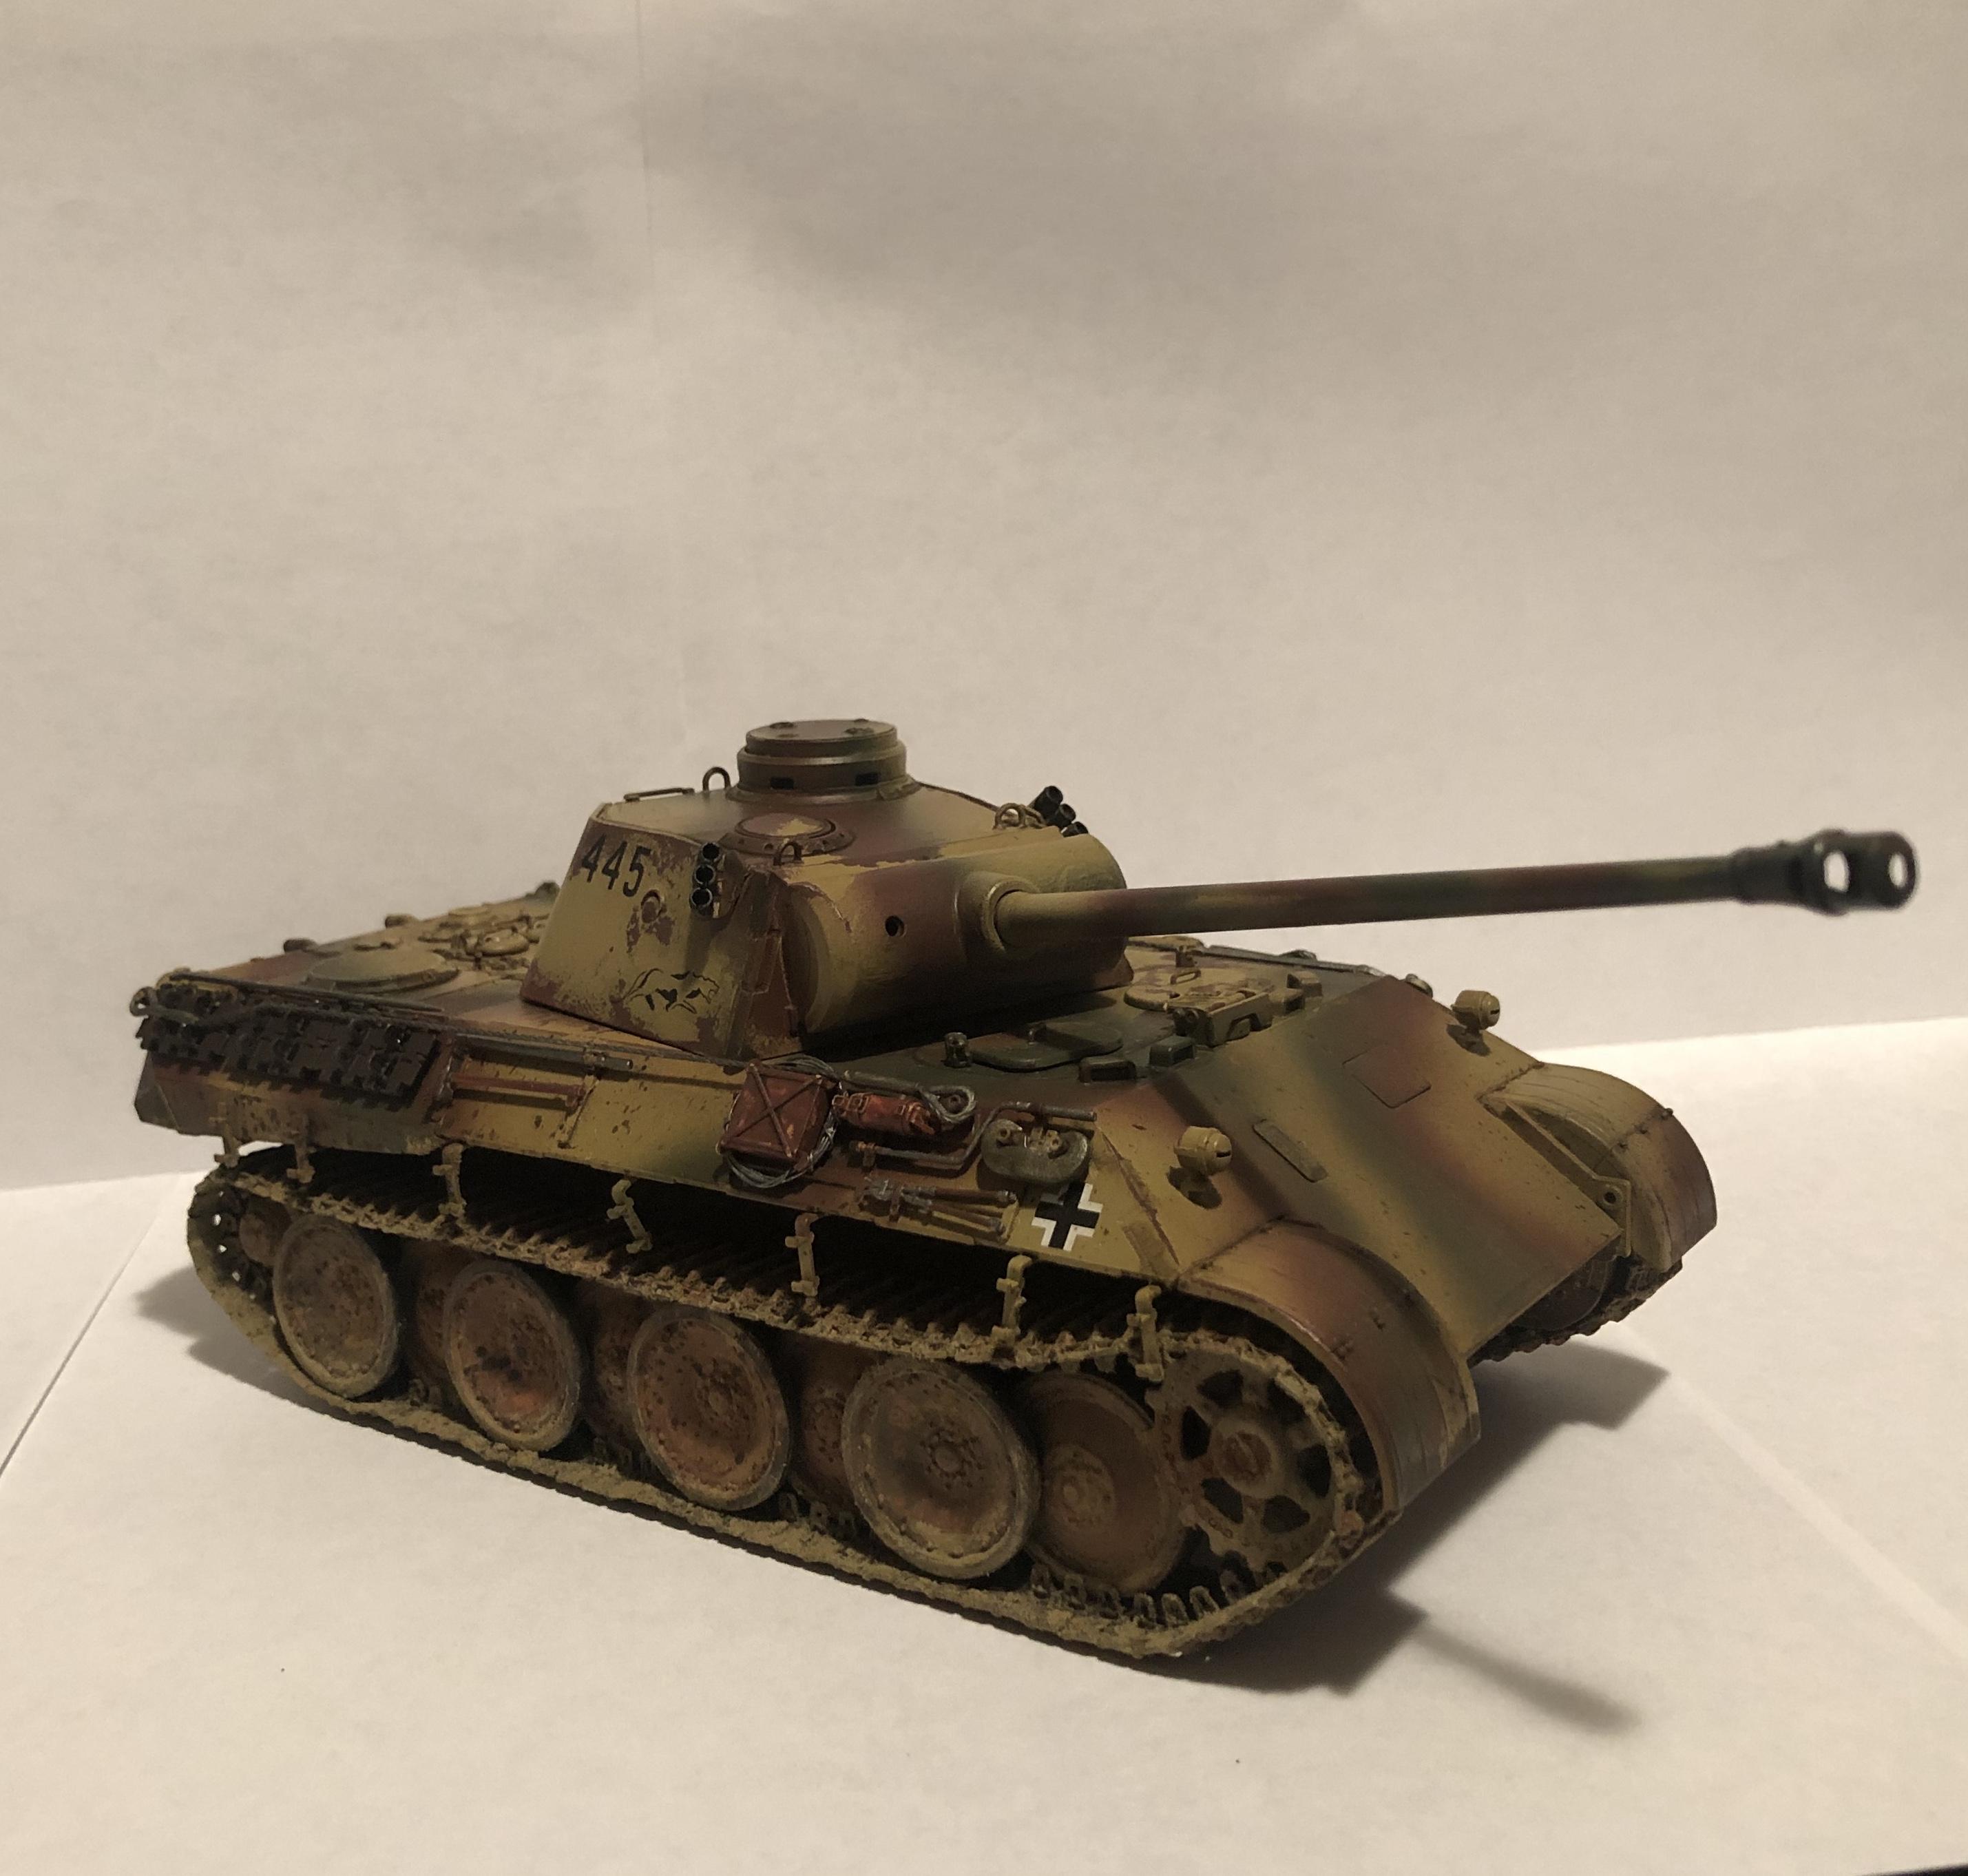 I built a tank - WIP: All The Rest: Motorcycles, Aviation, Military ...